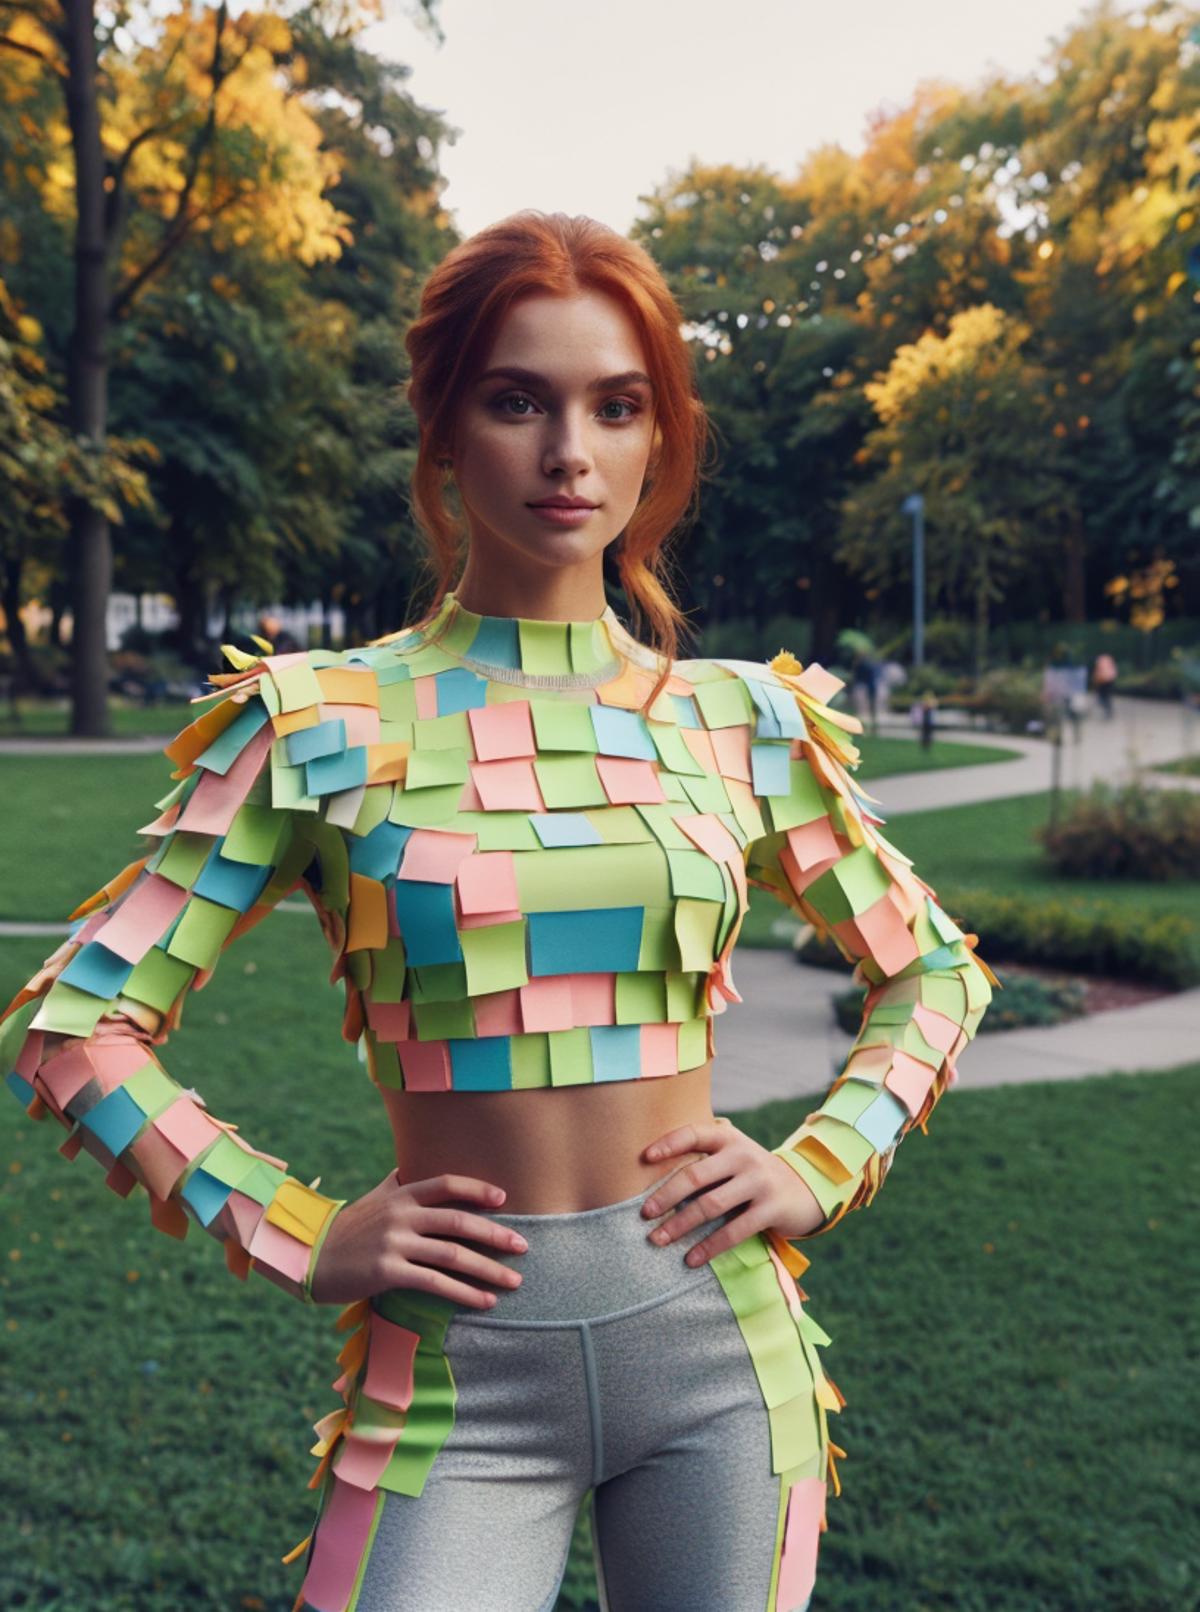 A woman wearing a green and pink shirt made from paper.